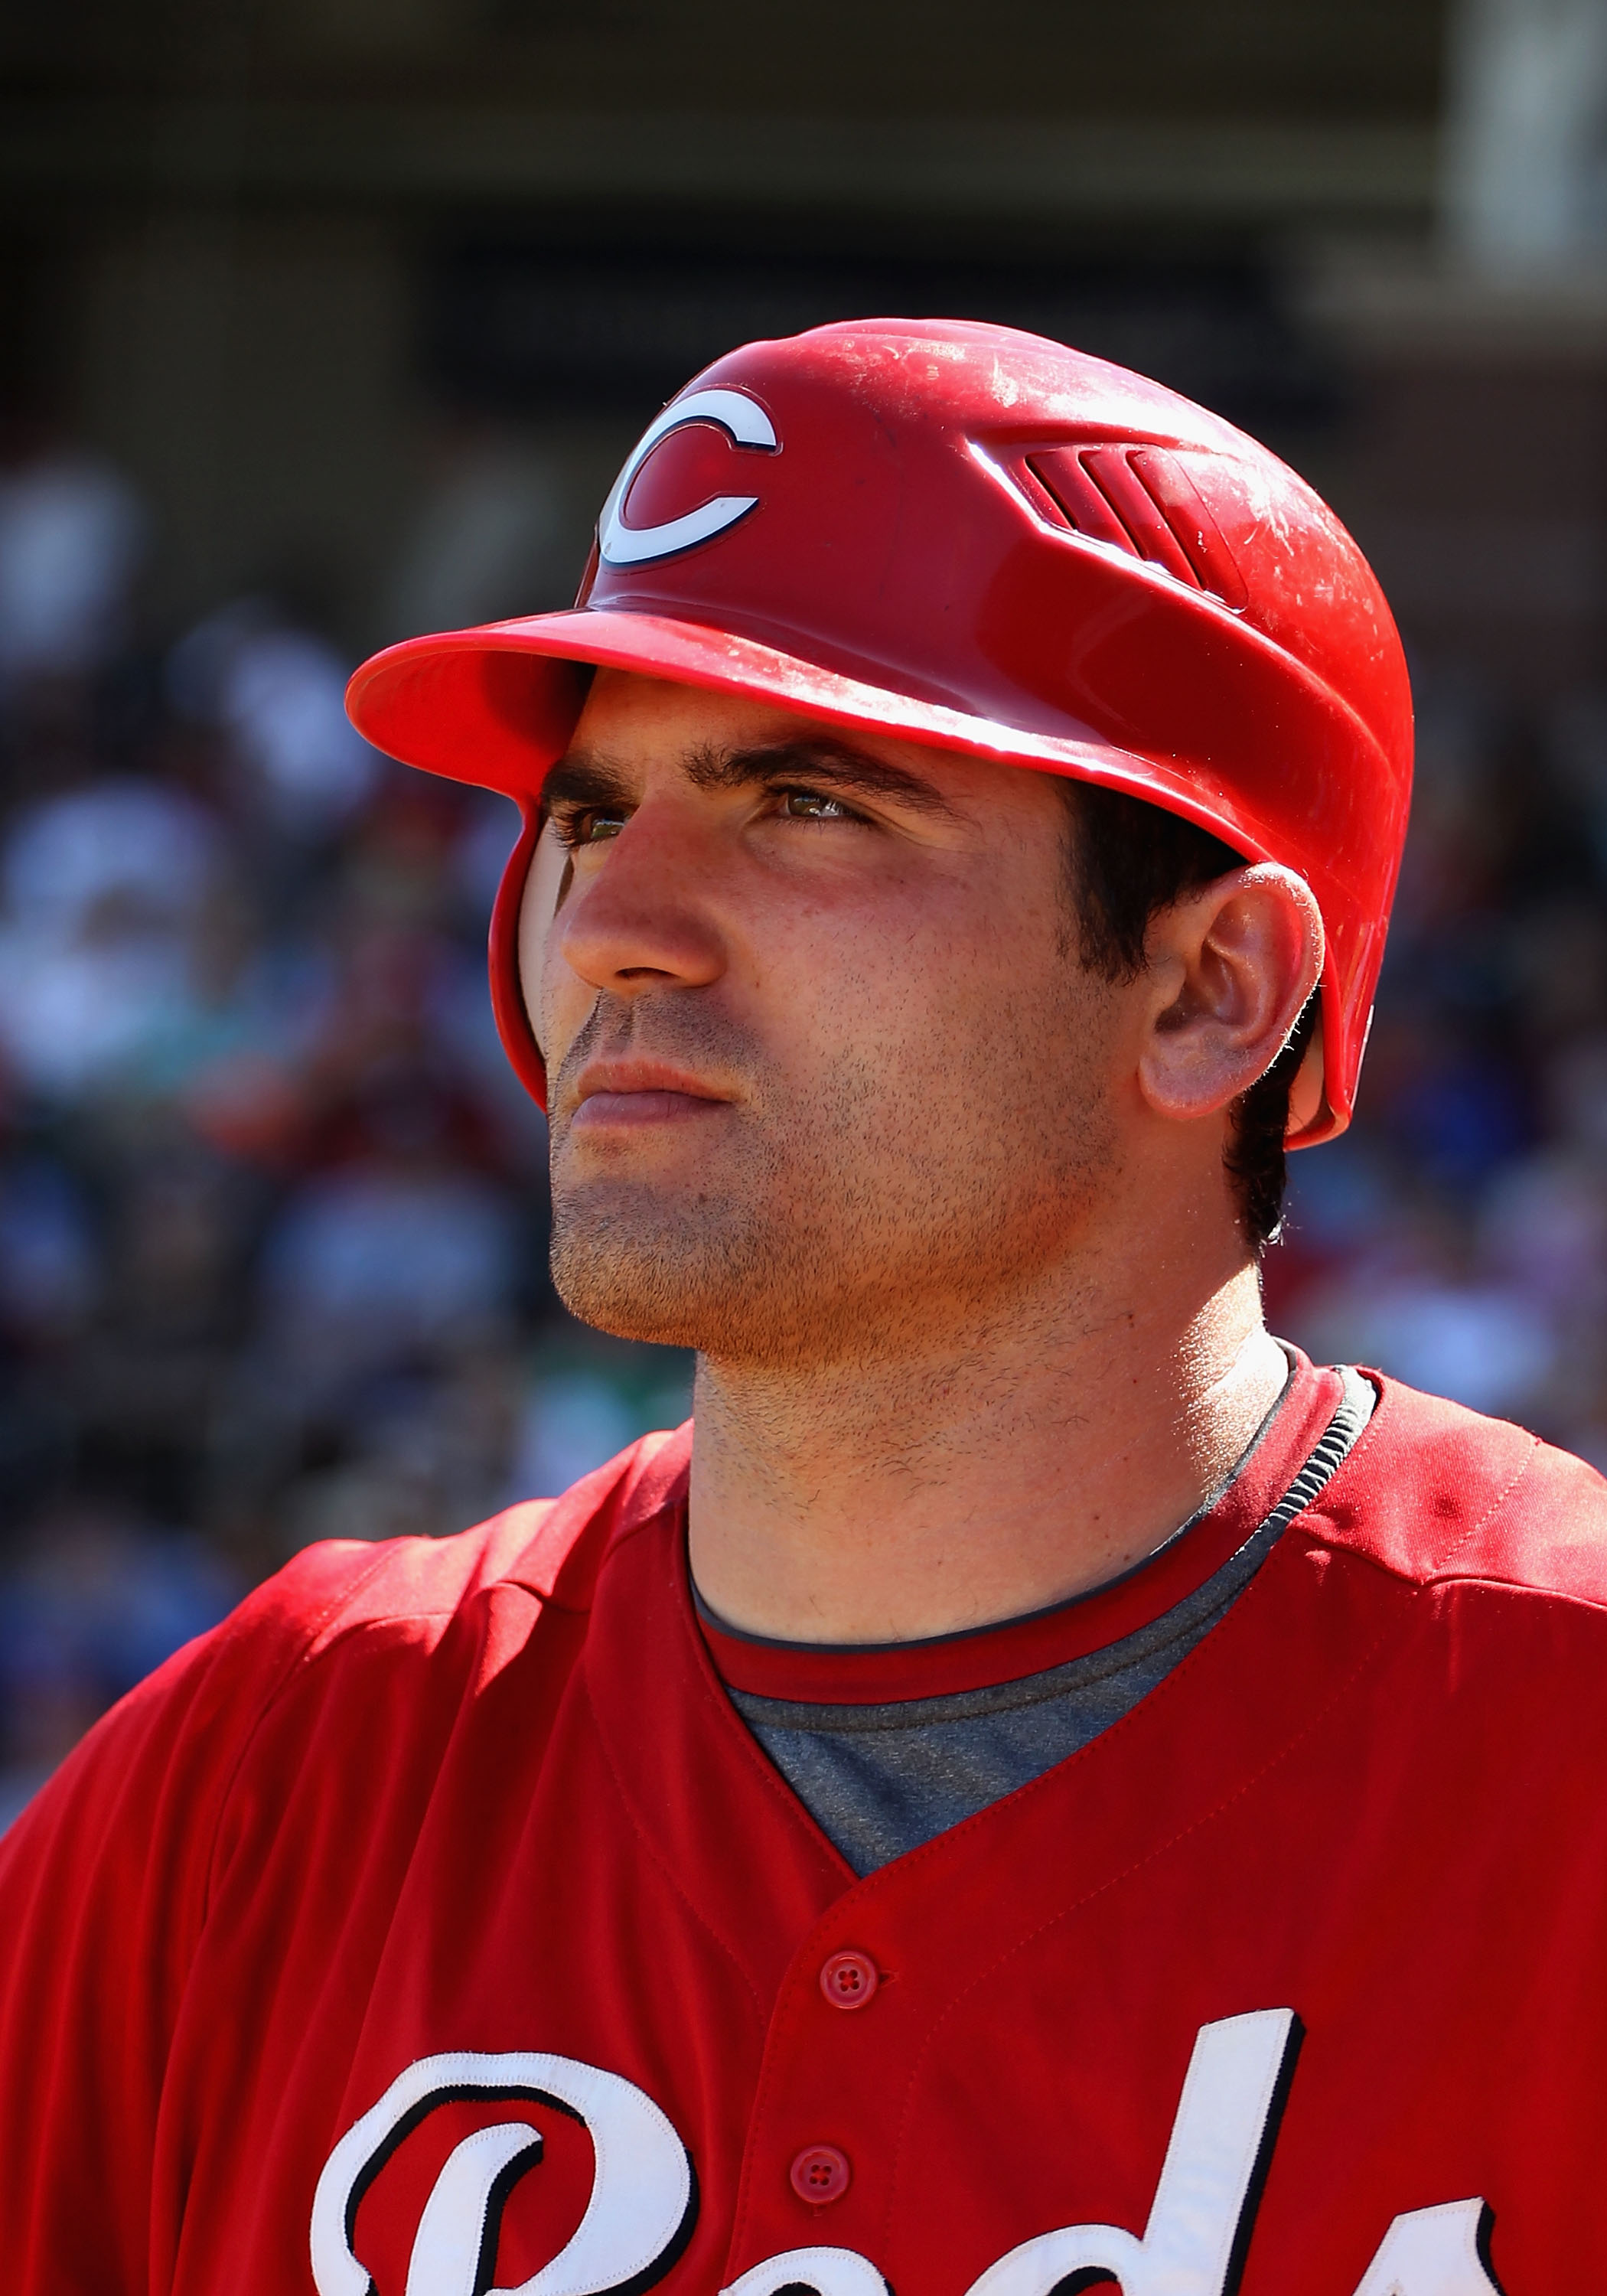 SURPRISE, AZ - MARCH 11:  Joey Votto #19 of the Cincinnati Reds waits to bat during the third inning of the spring training game against the Texas Rangers at Surprise Stadium on March 11, 2011 in Surprise, Arizona.  (Photo by Christian Petersen/Getty Imag